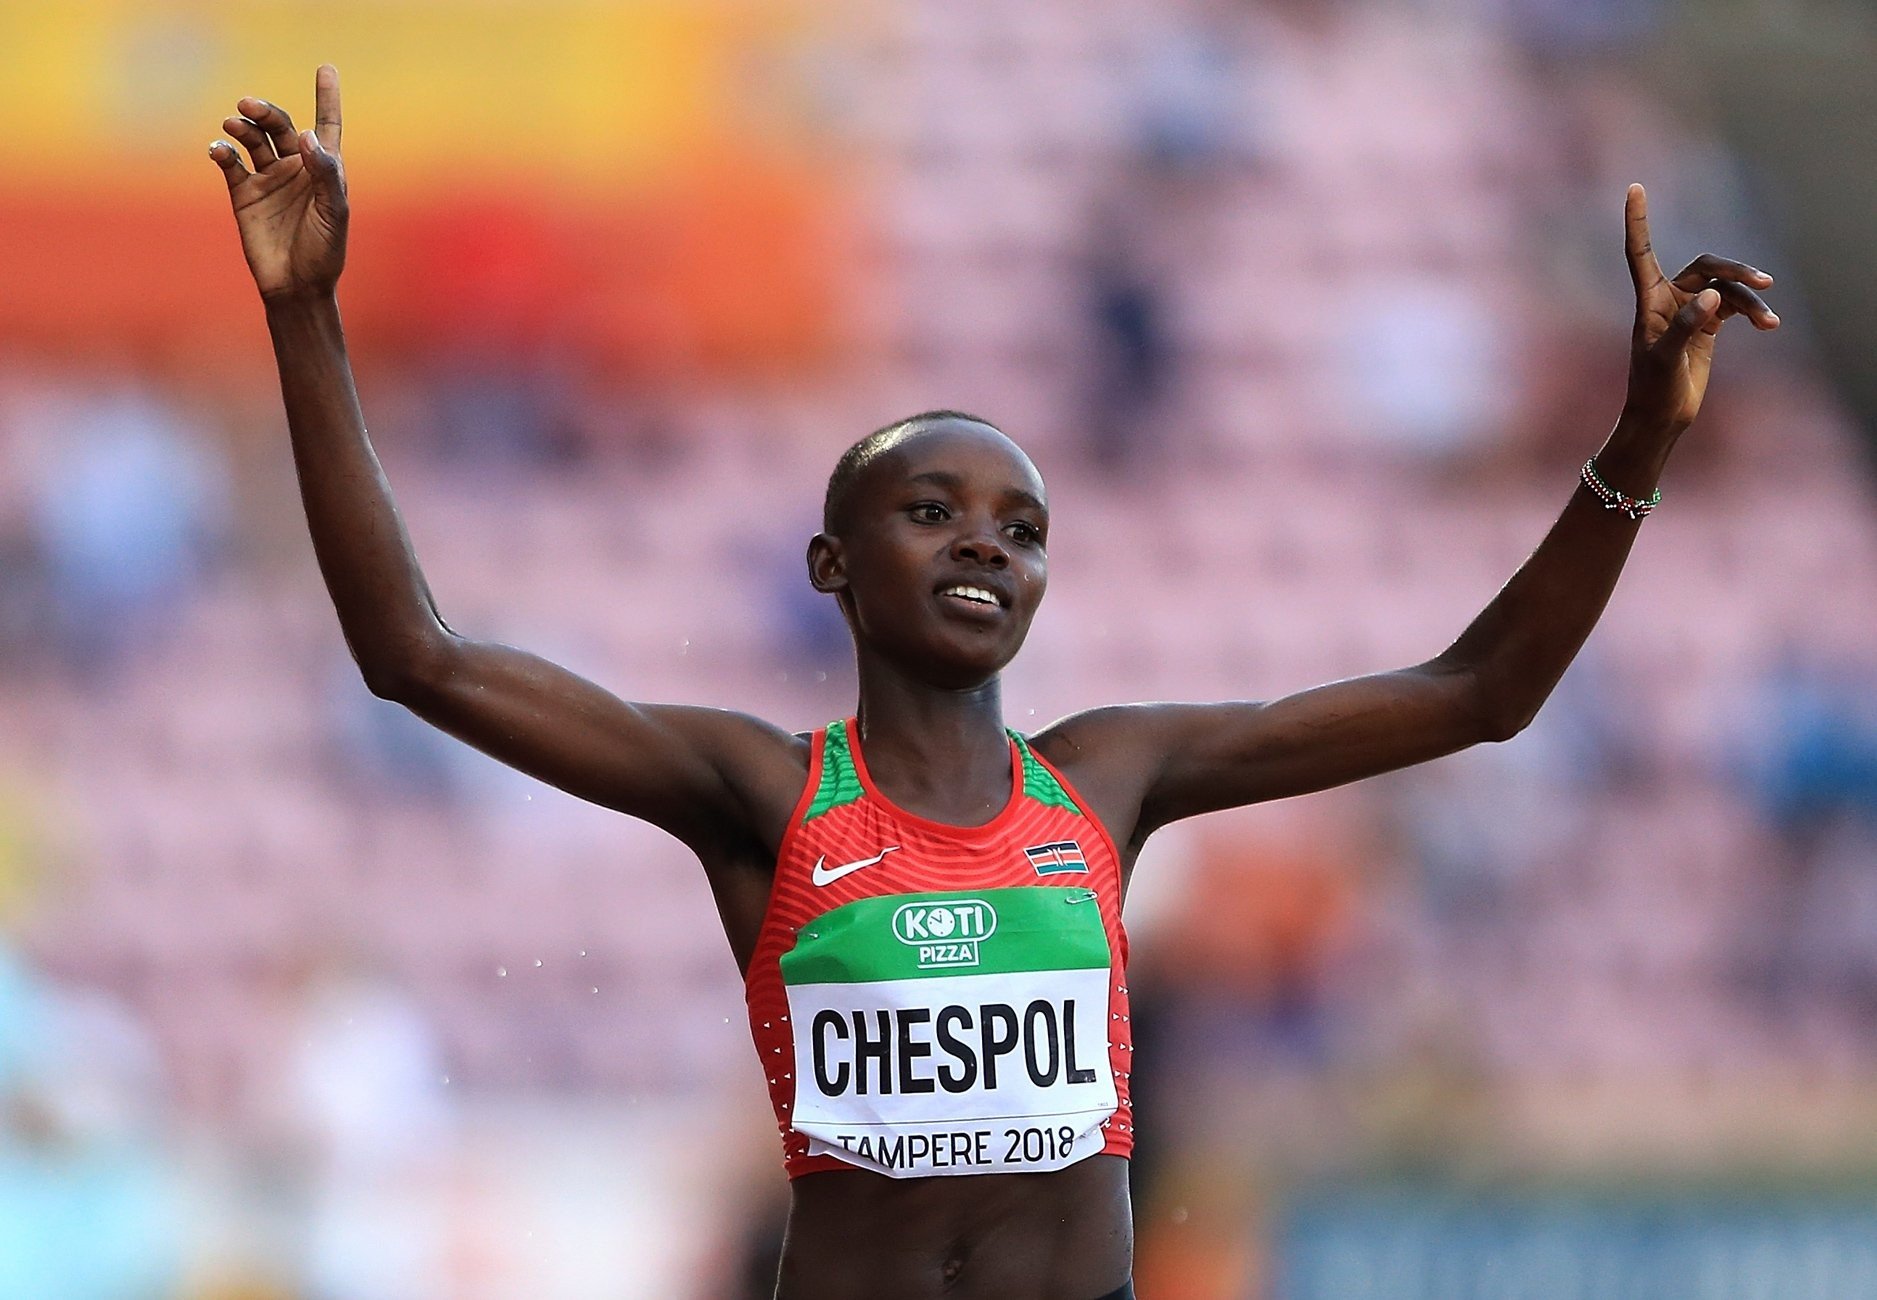 Kenya's Celiphine Chespol takes 3000m steeplechase gold at the IAAF World U20 Championships Tampere 2018 / Photo credit: Getty Images for IAAF